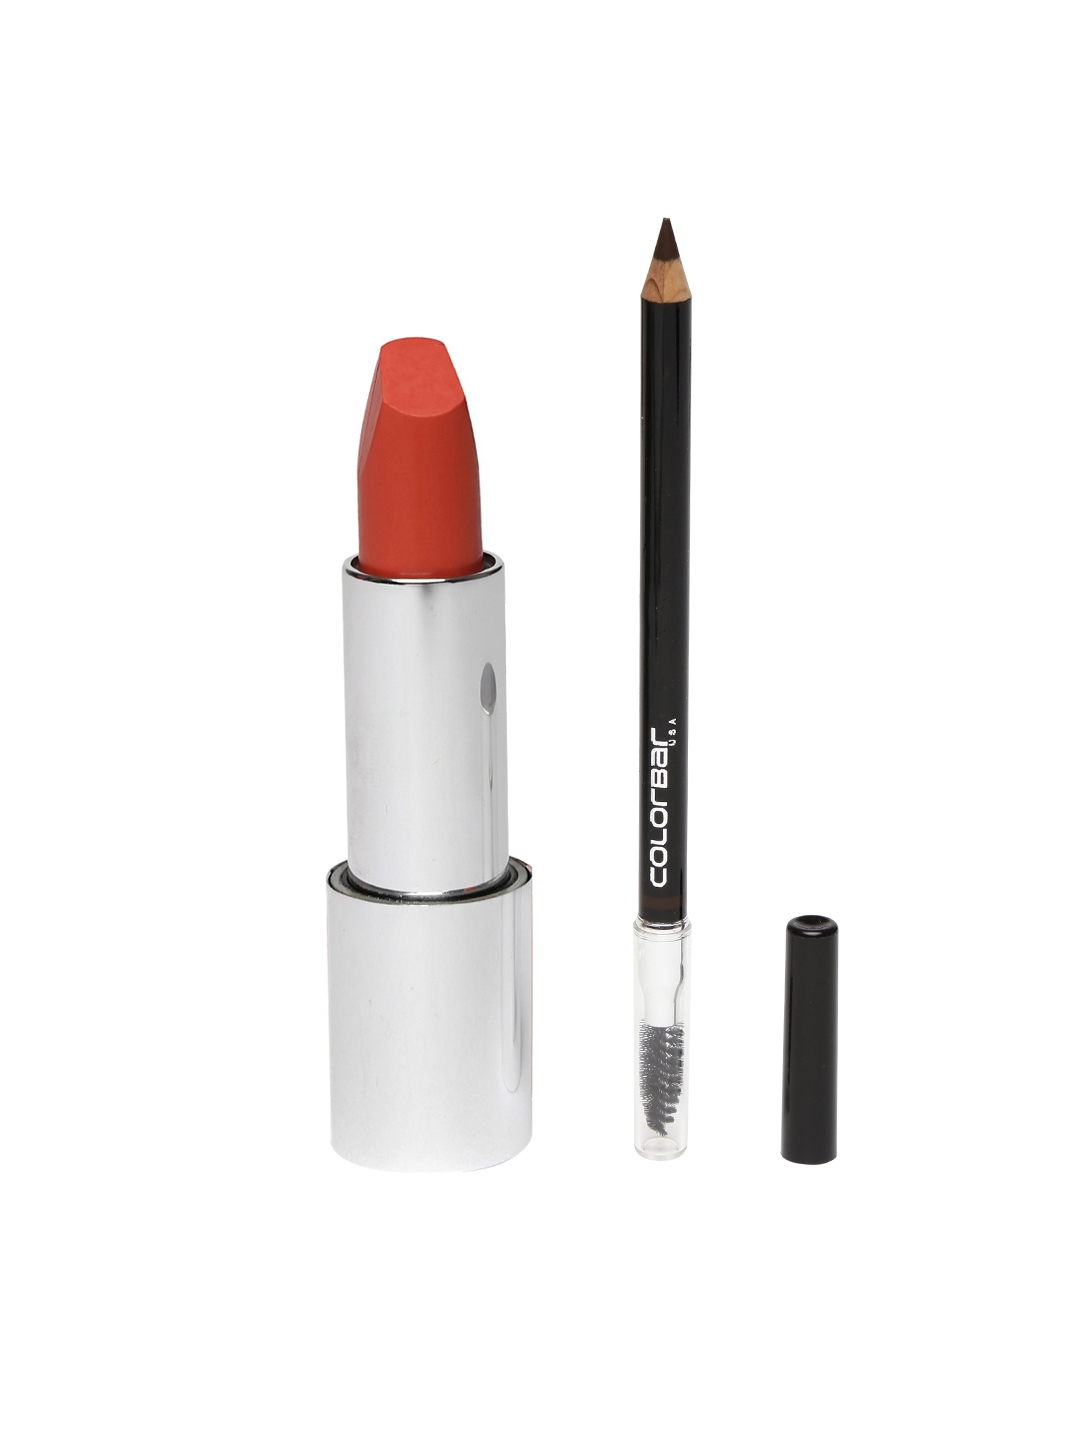 Buy Colorbar Light Coral Lipstick 006 & Chestnut Stunning Brow Pencil 001 -  Beauty Gift Set for Women 2302461 | Myntra